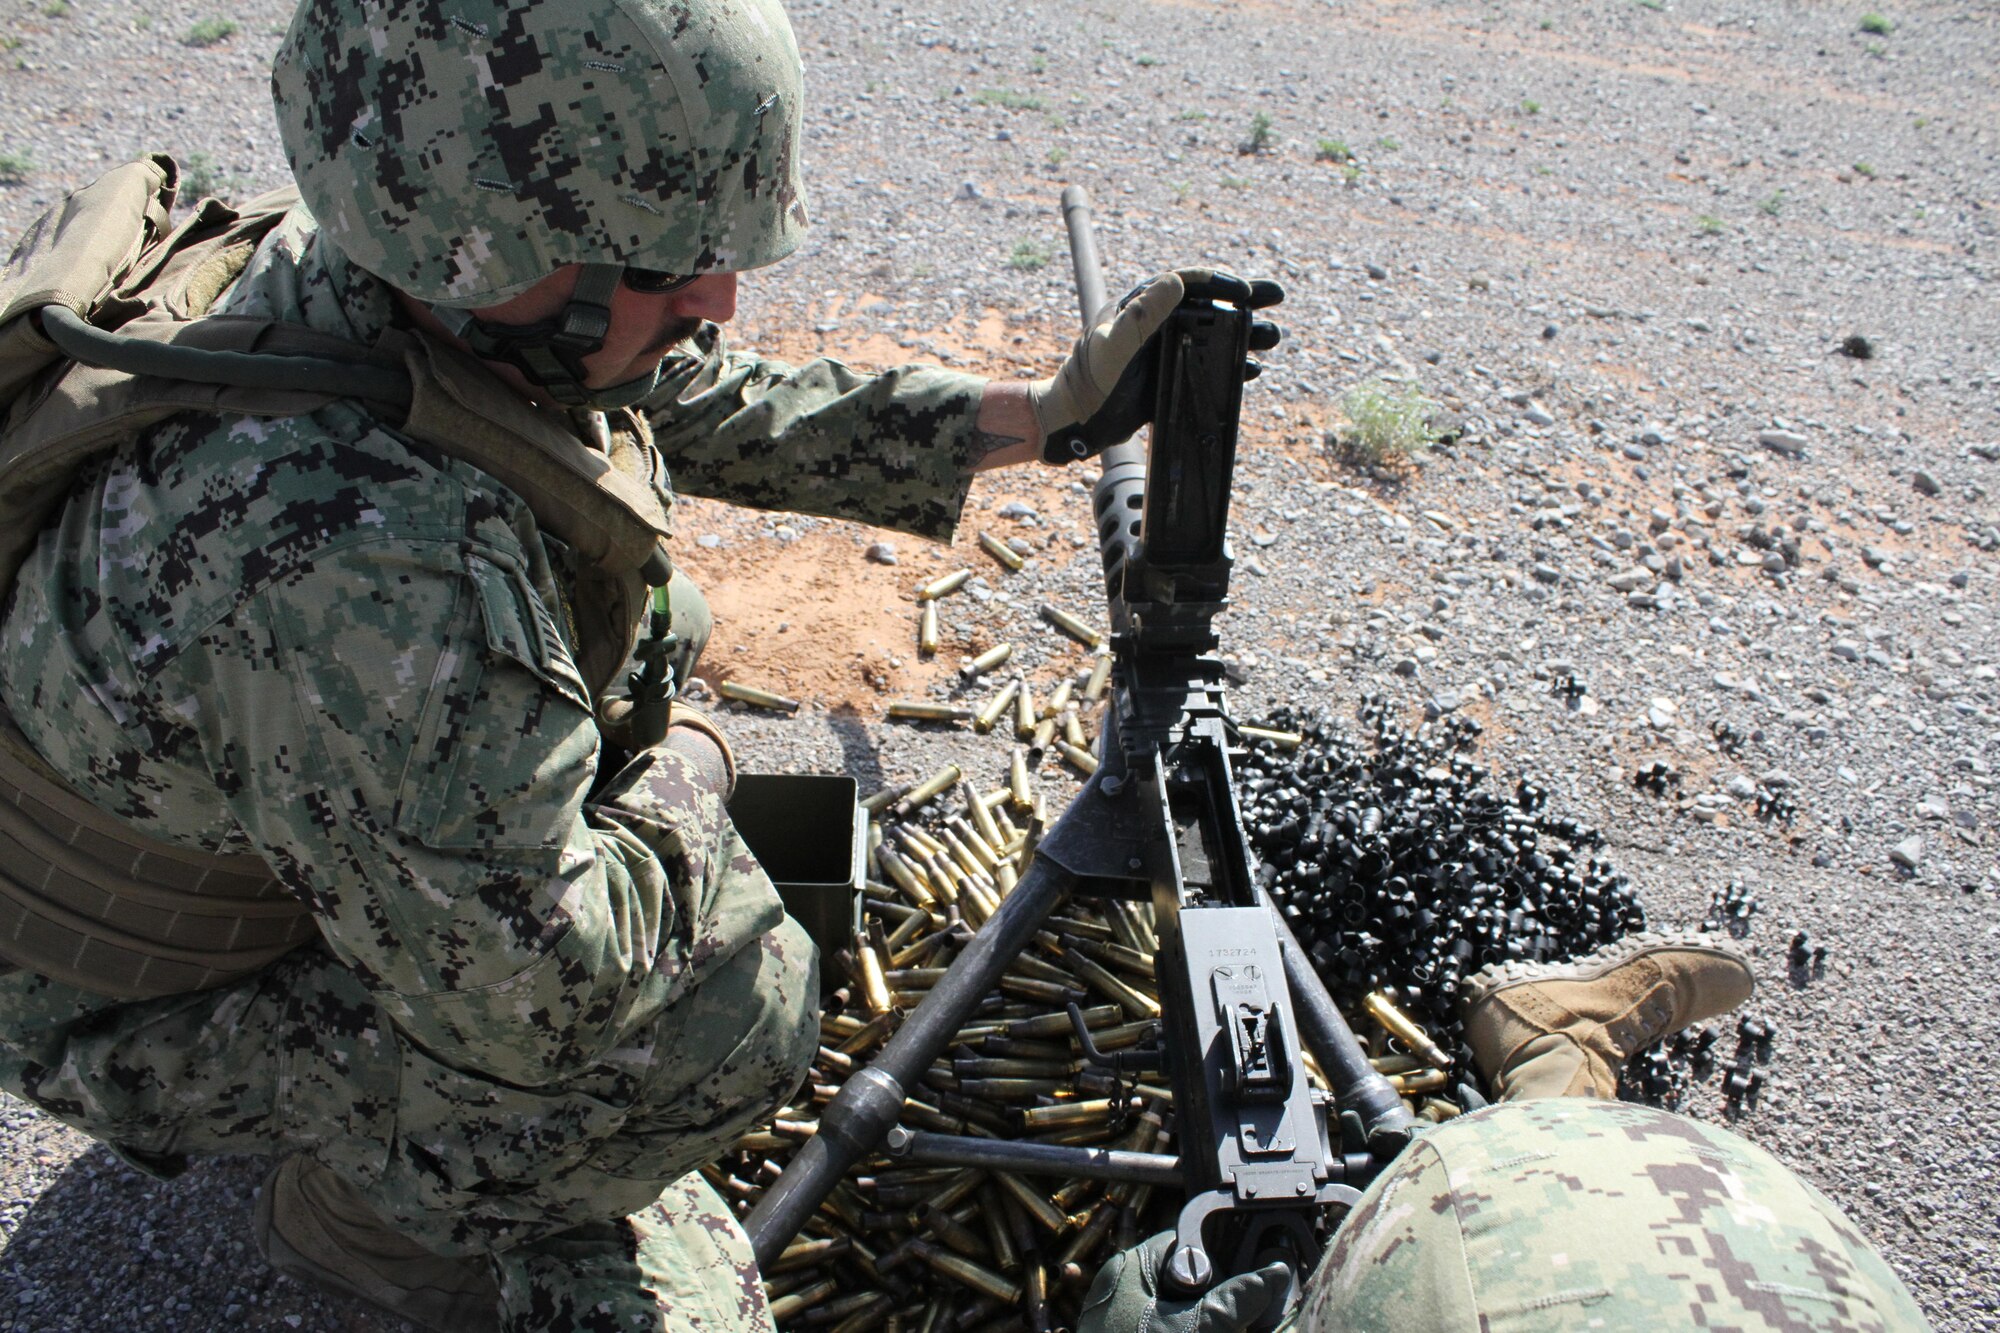 Assistant gunner U.S. Petty Officer 2nd Class Christopher Norberto checks that the chamber is clear on an M2 .50 caliber machine gun during heavy weapons firing on Fort Bliss' Range 39.